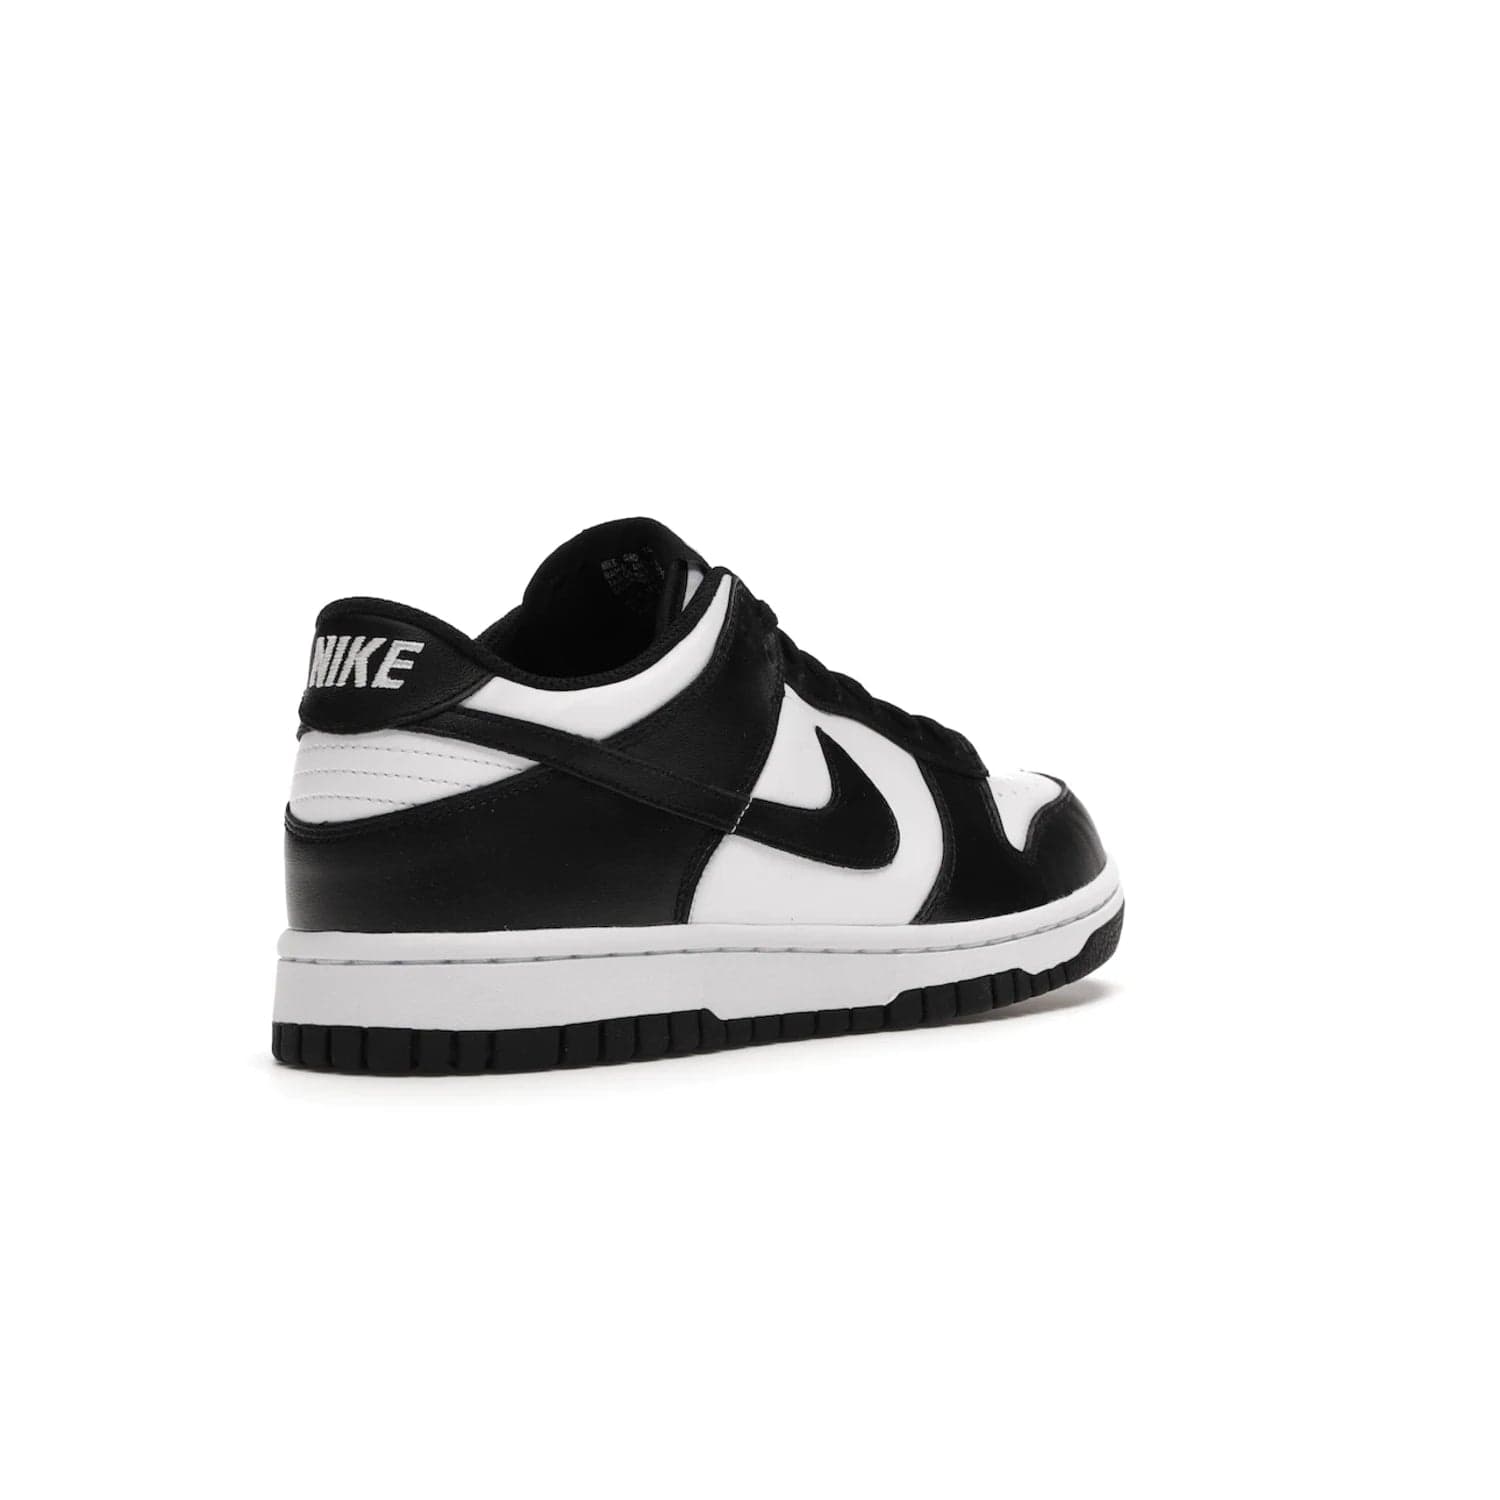 Nike Dunk Low Retro White Black Panda (2021) (GS) - Image 32 - Only at www.BallersClubKickz.com - Upgrade your style with the Nike Dunk Low Retro White Black (GS). Featuring premium leather, iconic Nike text, signature Swoosh logo and striking black/white colorway, this striking silhouette is the perfect mix of style and comfort. Colorway released in March 2021.